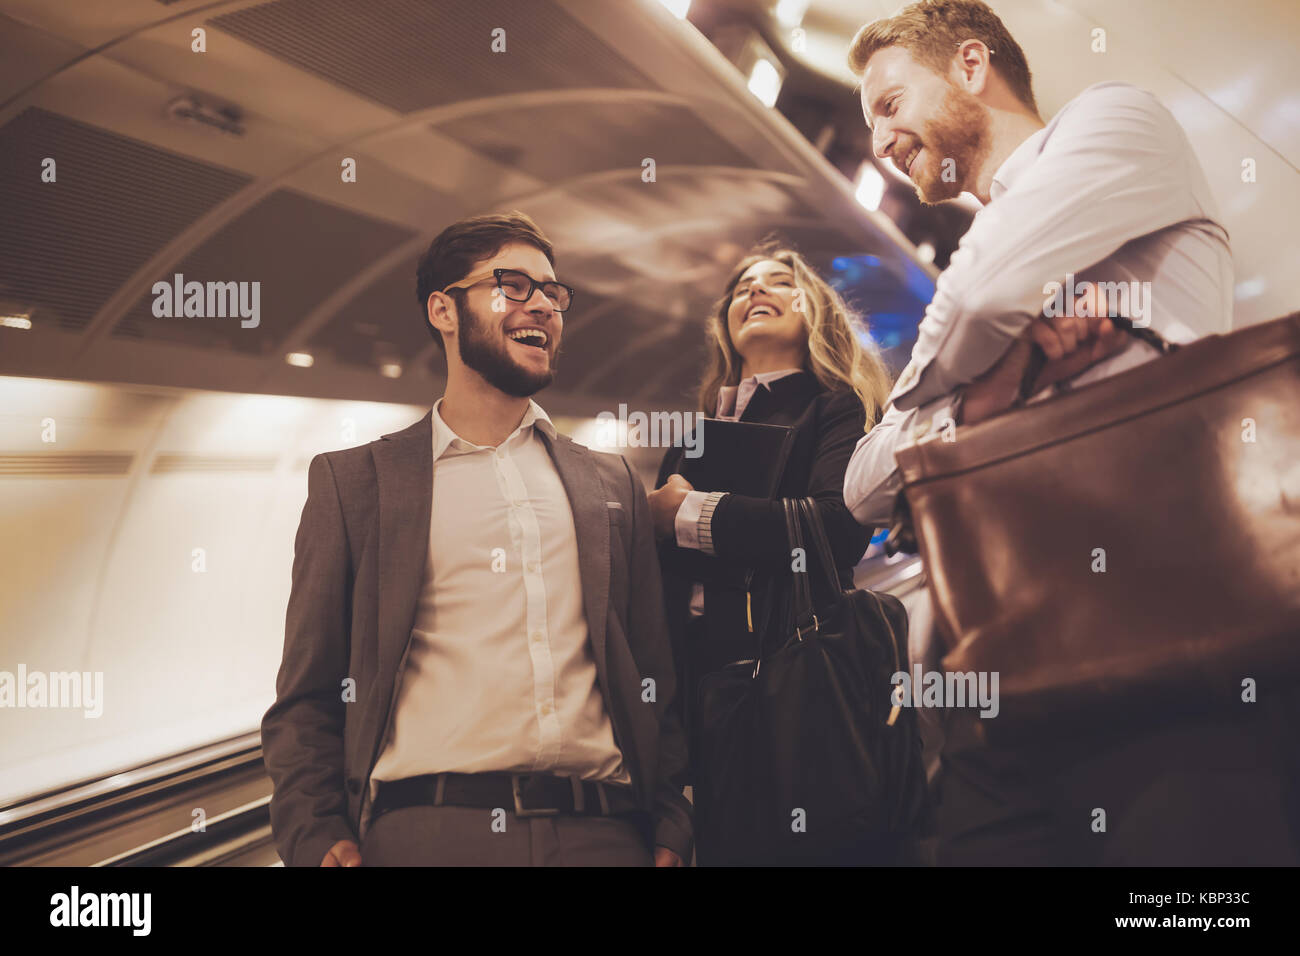 Business people waiting for subway transportation Stock Photo